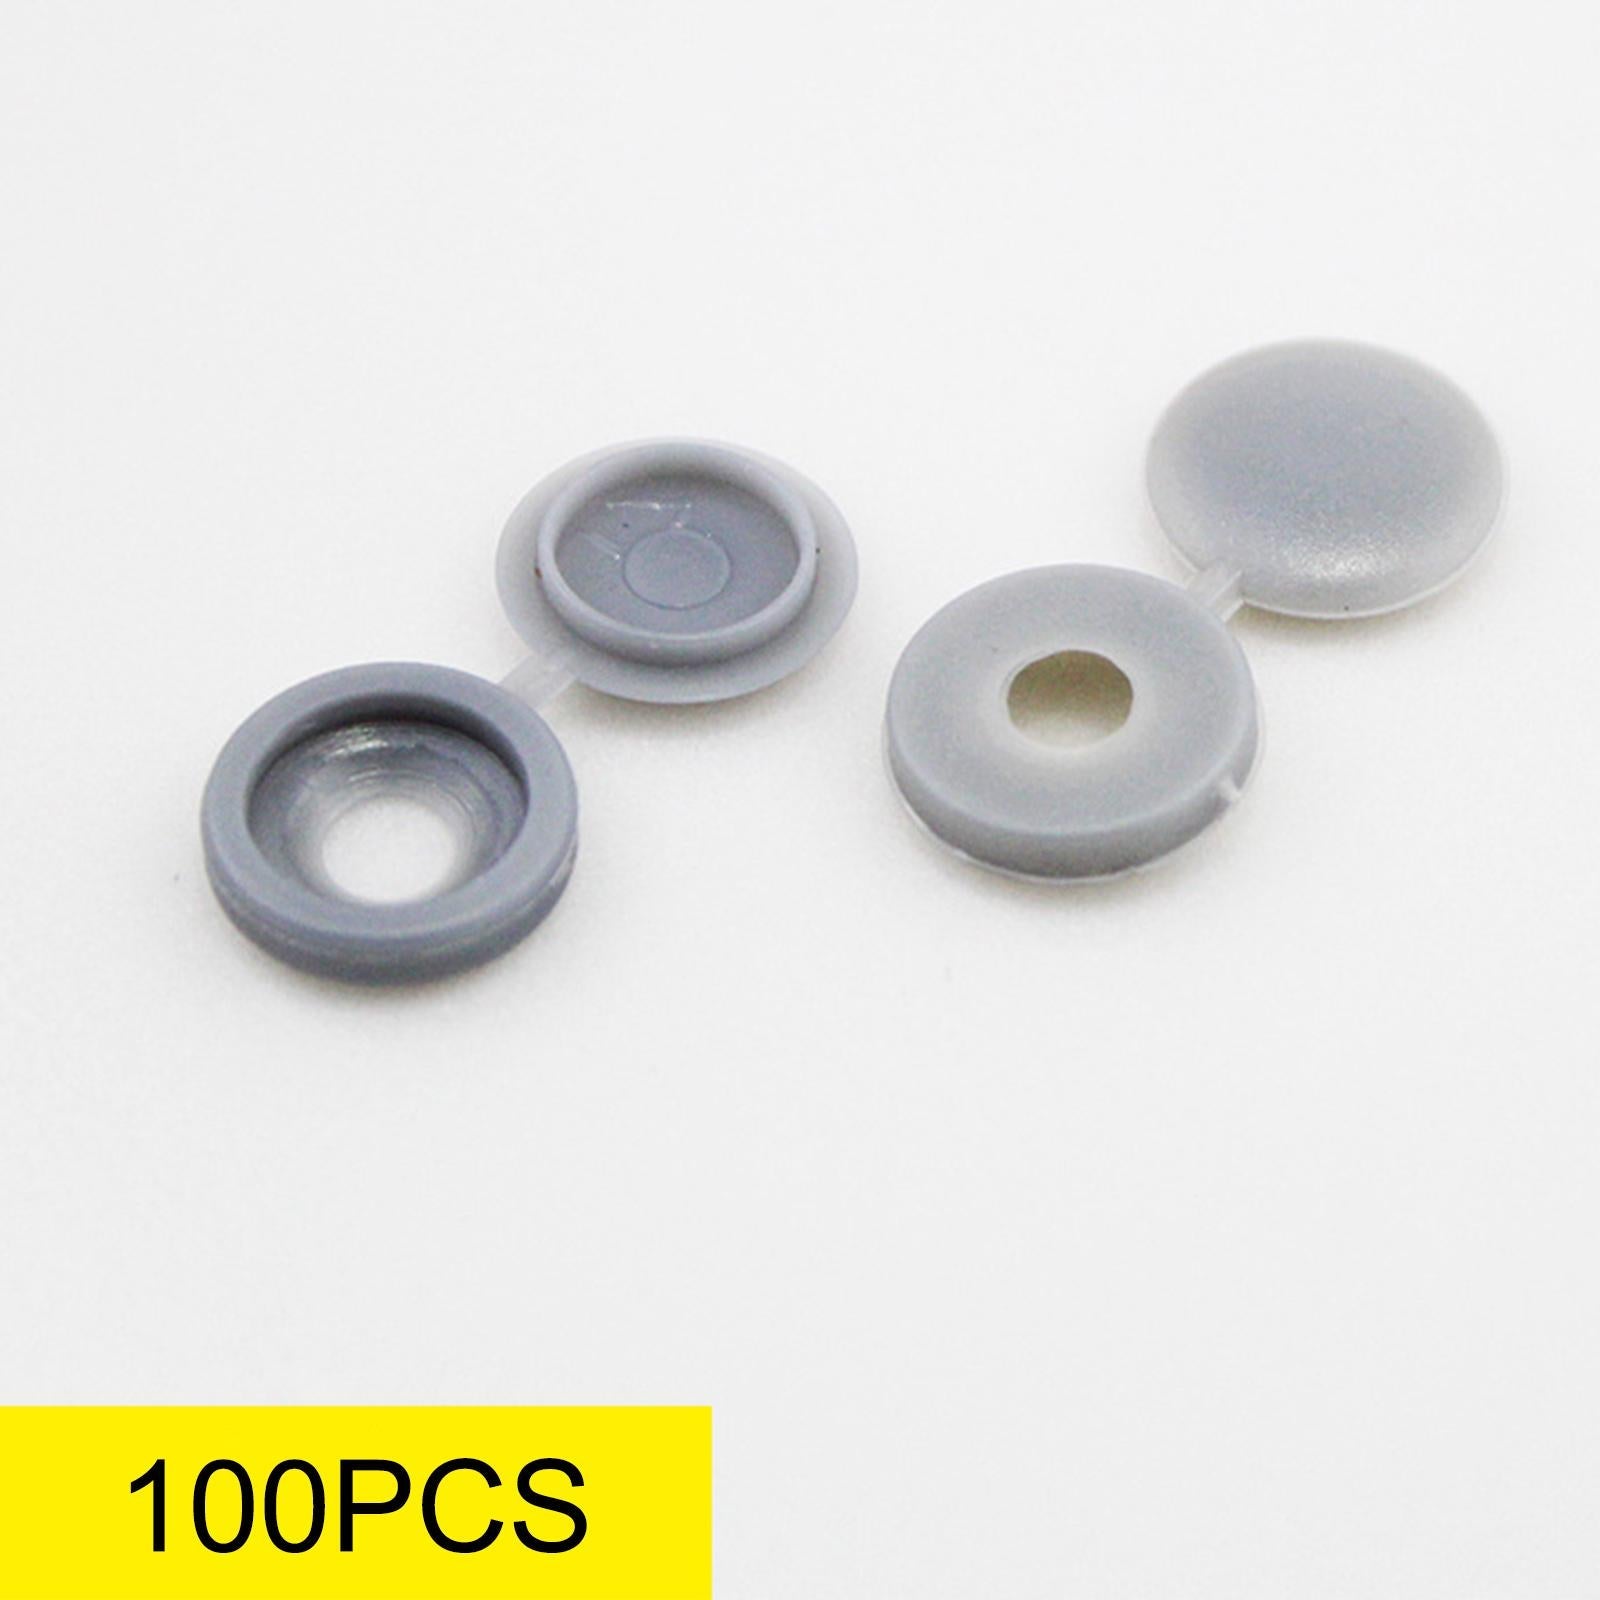 100 Pieces Screw Covers, Practical Screws Caps for Replacement Tools Yard Grey